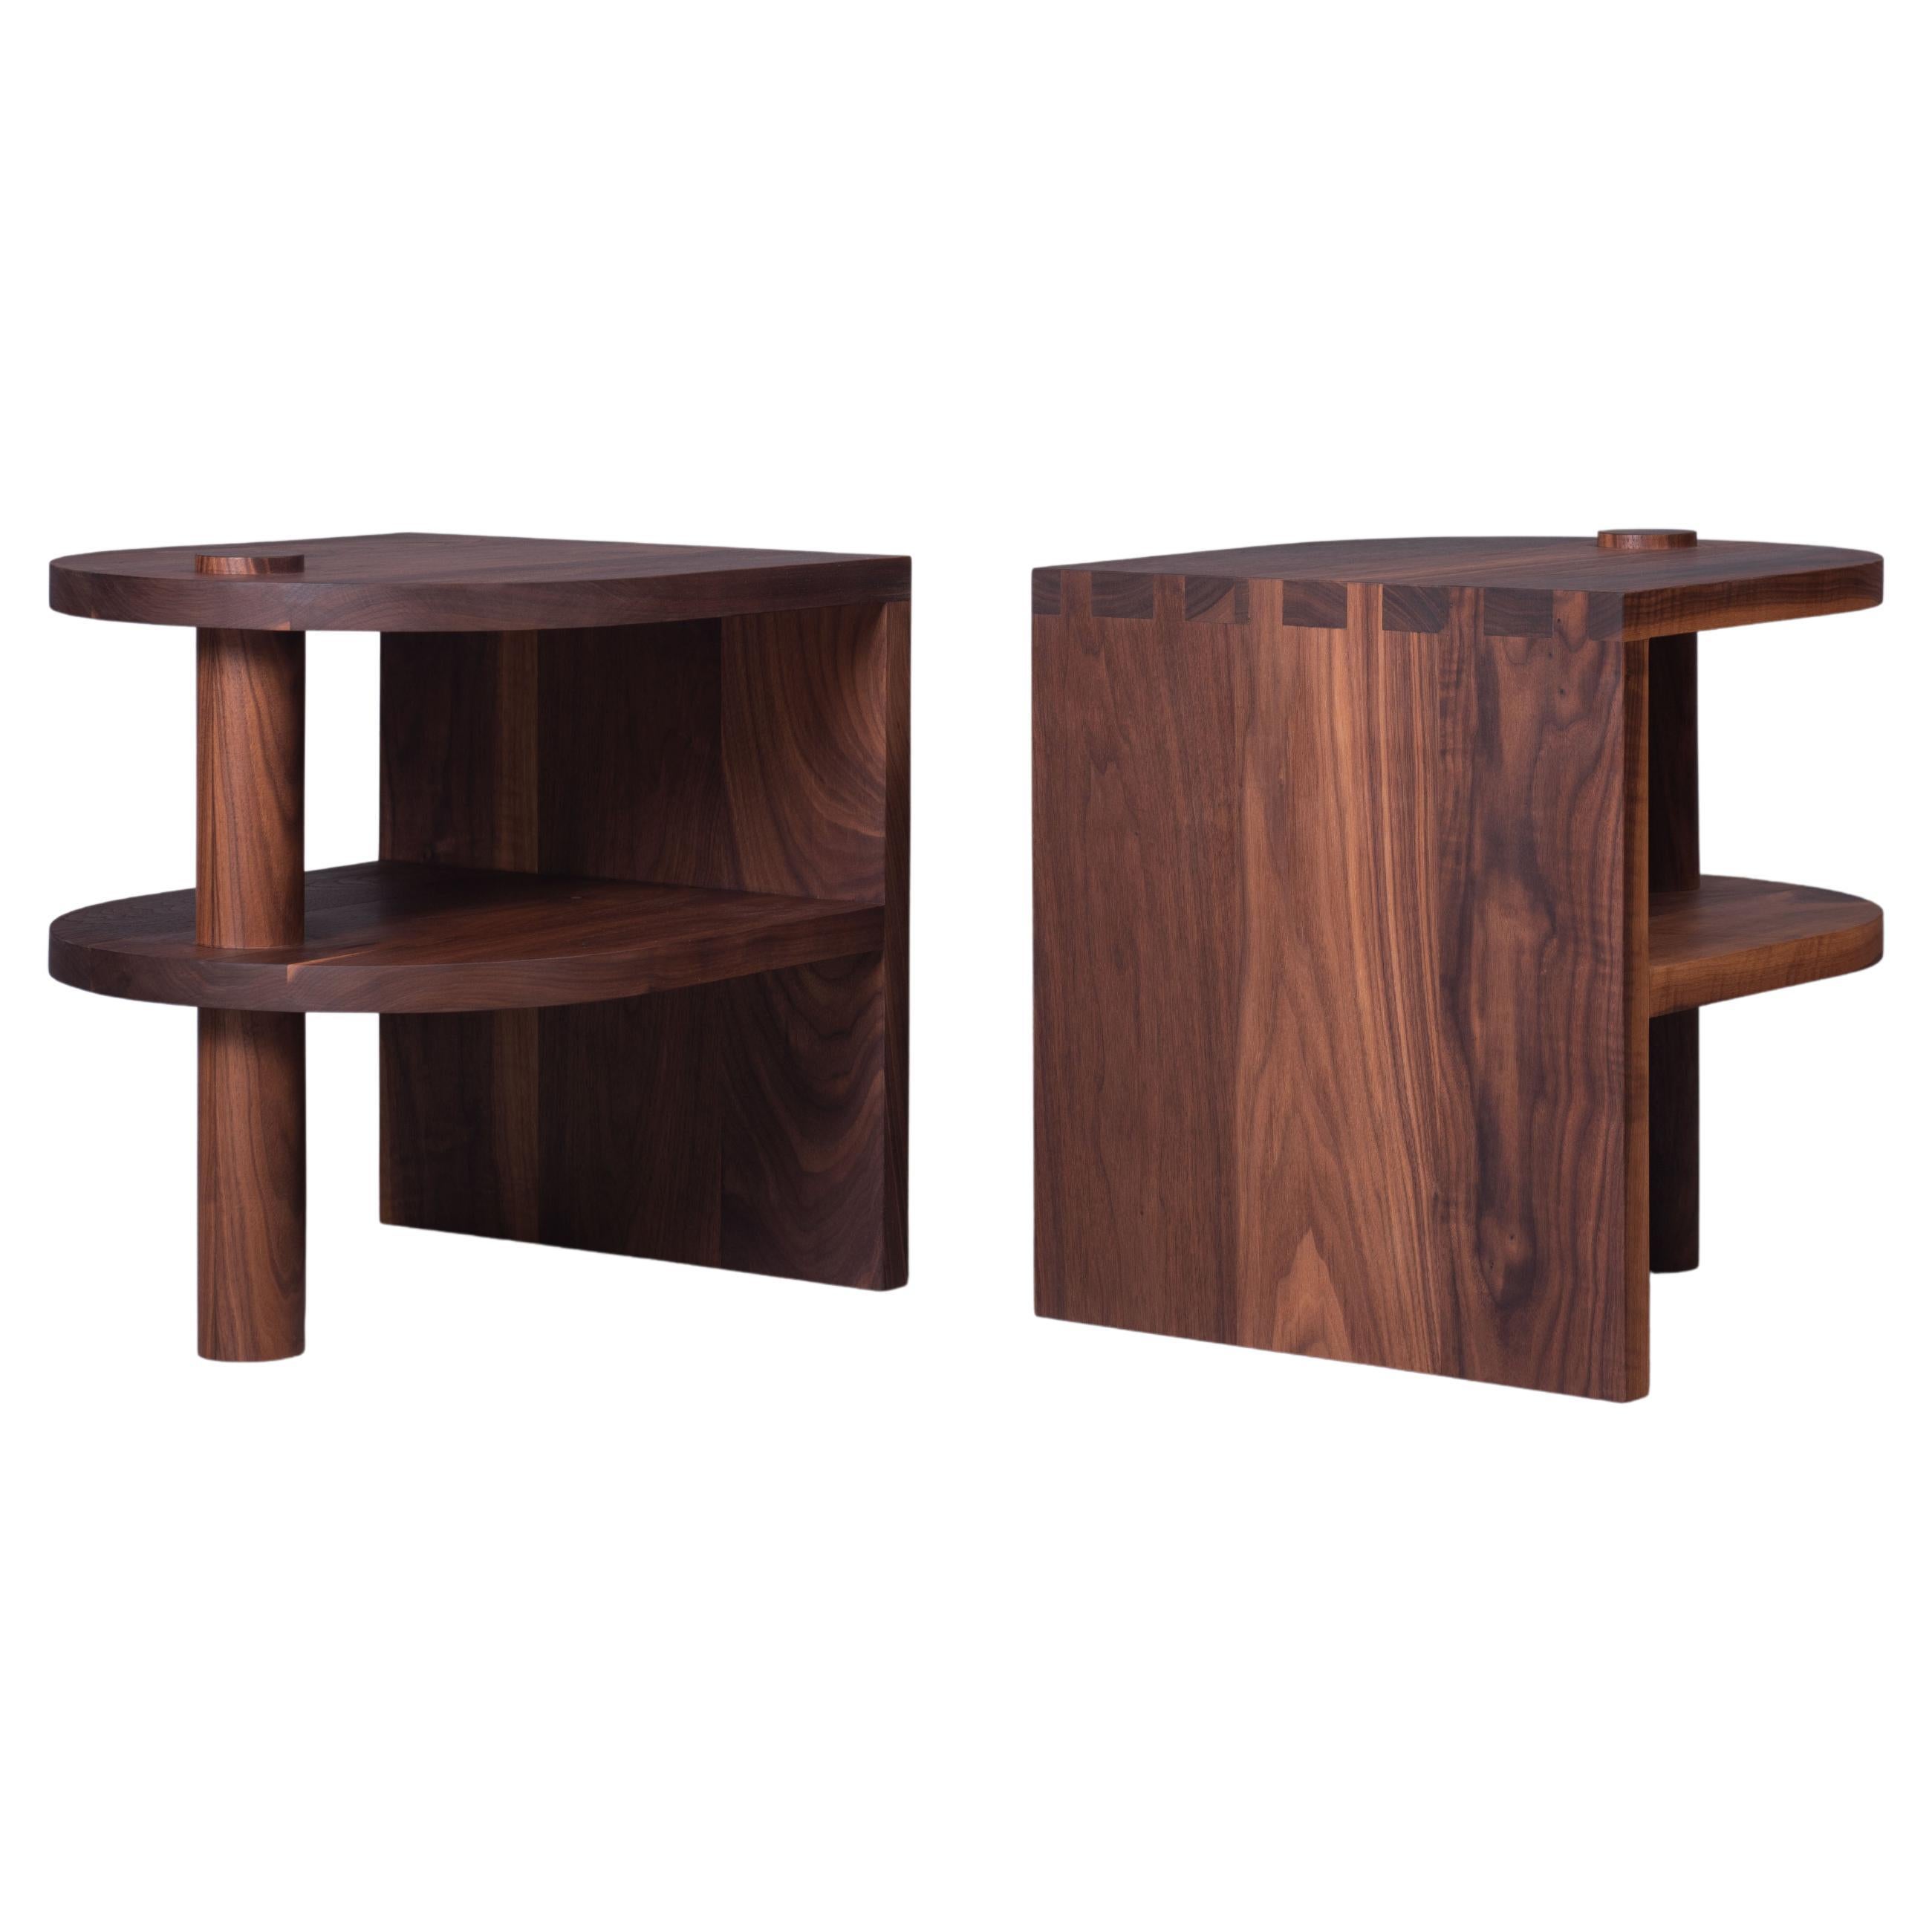 Pair of Handcrafted Walnut Nightstands / End Tables